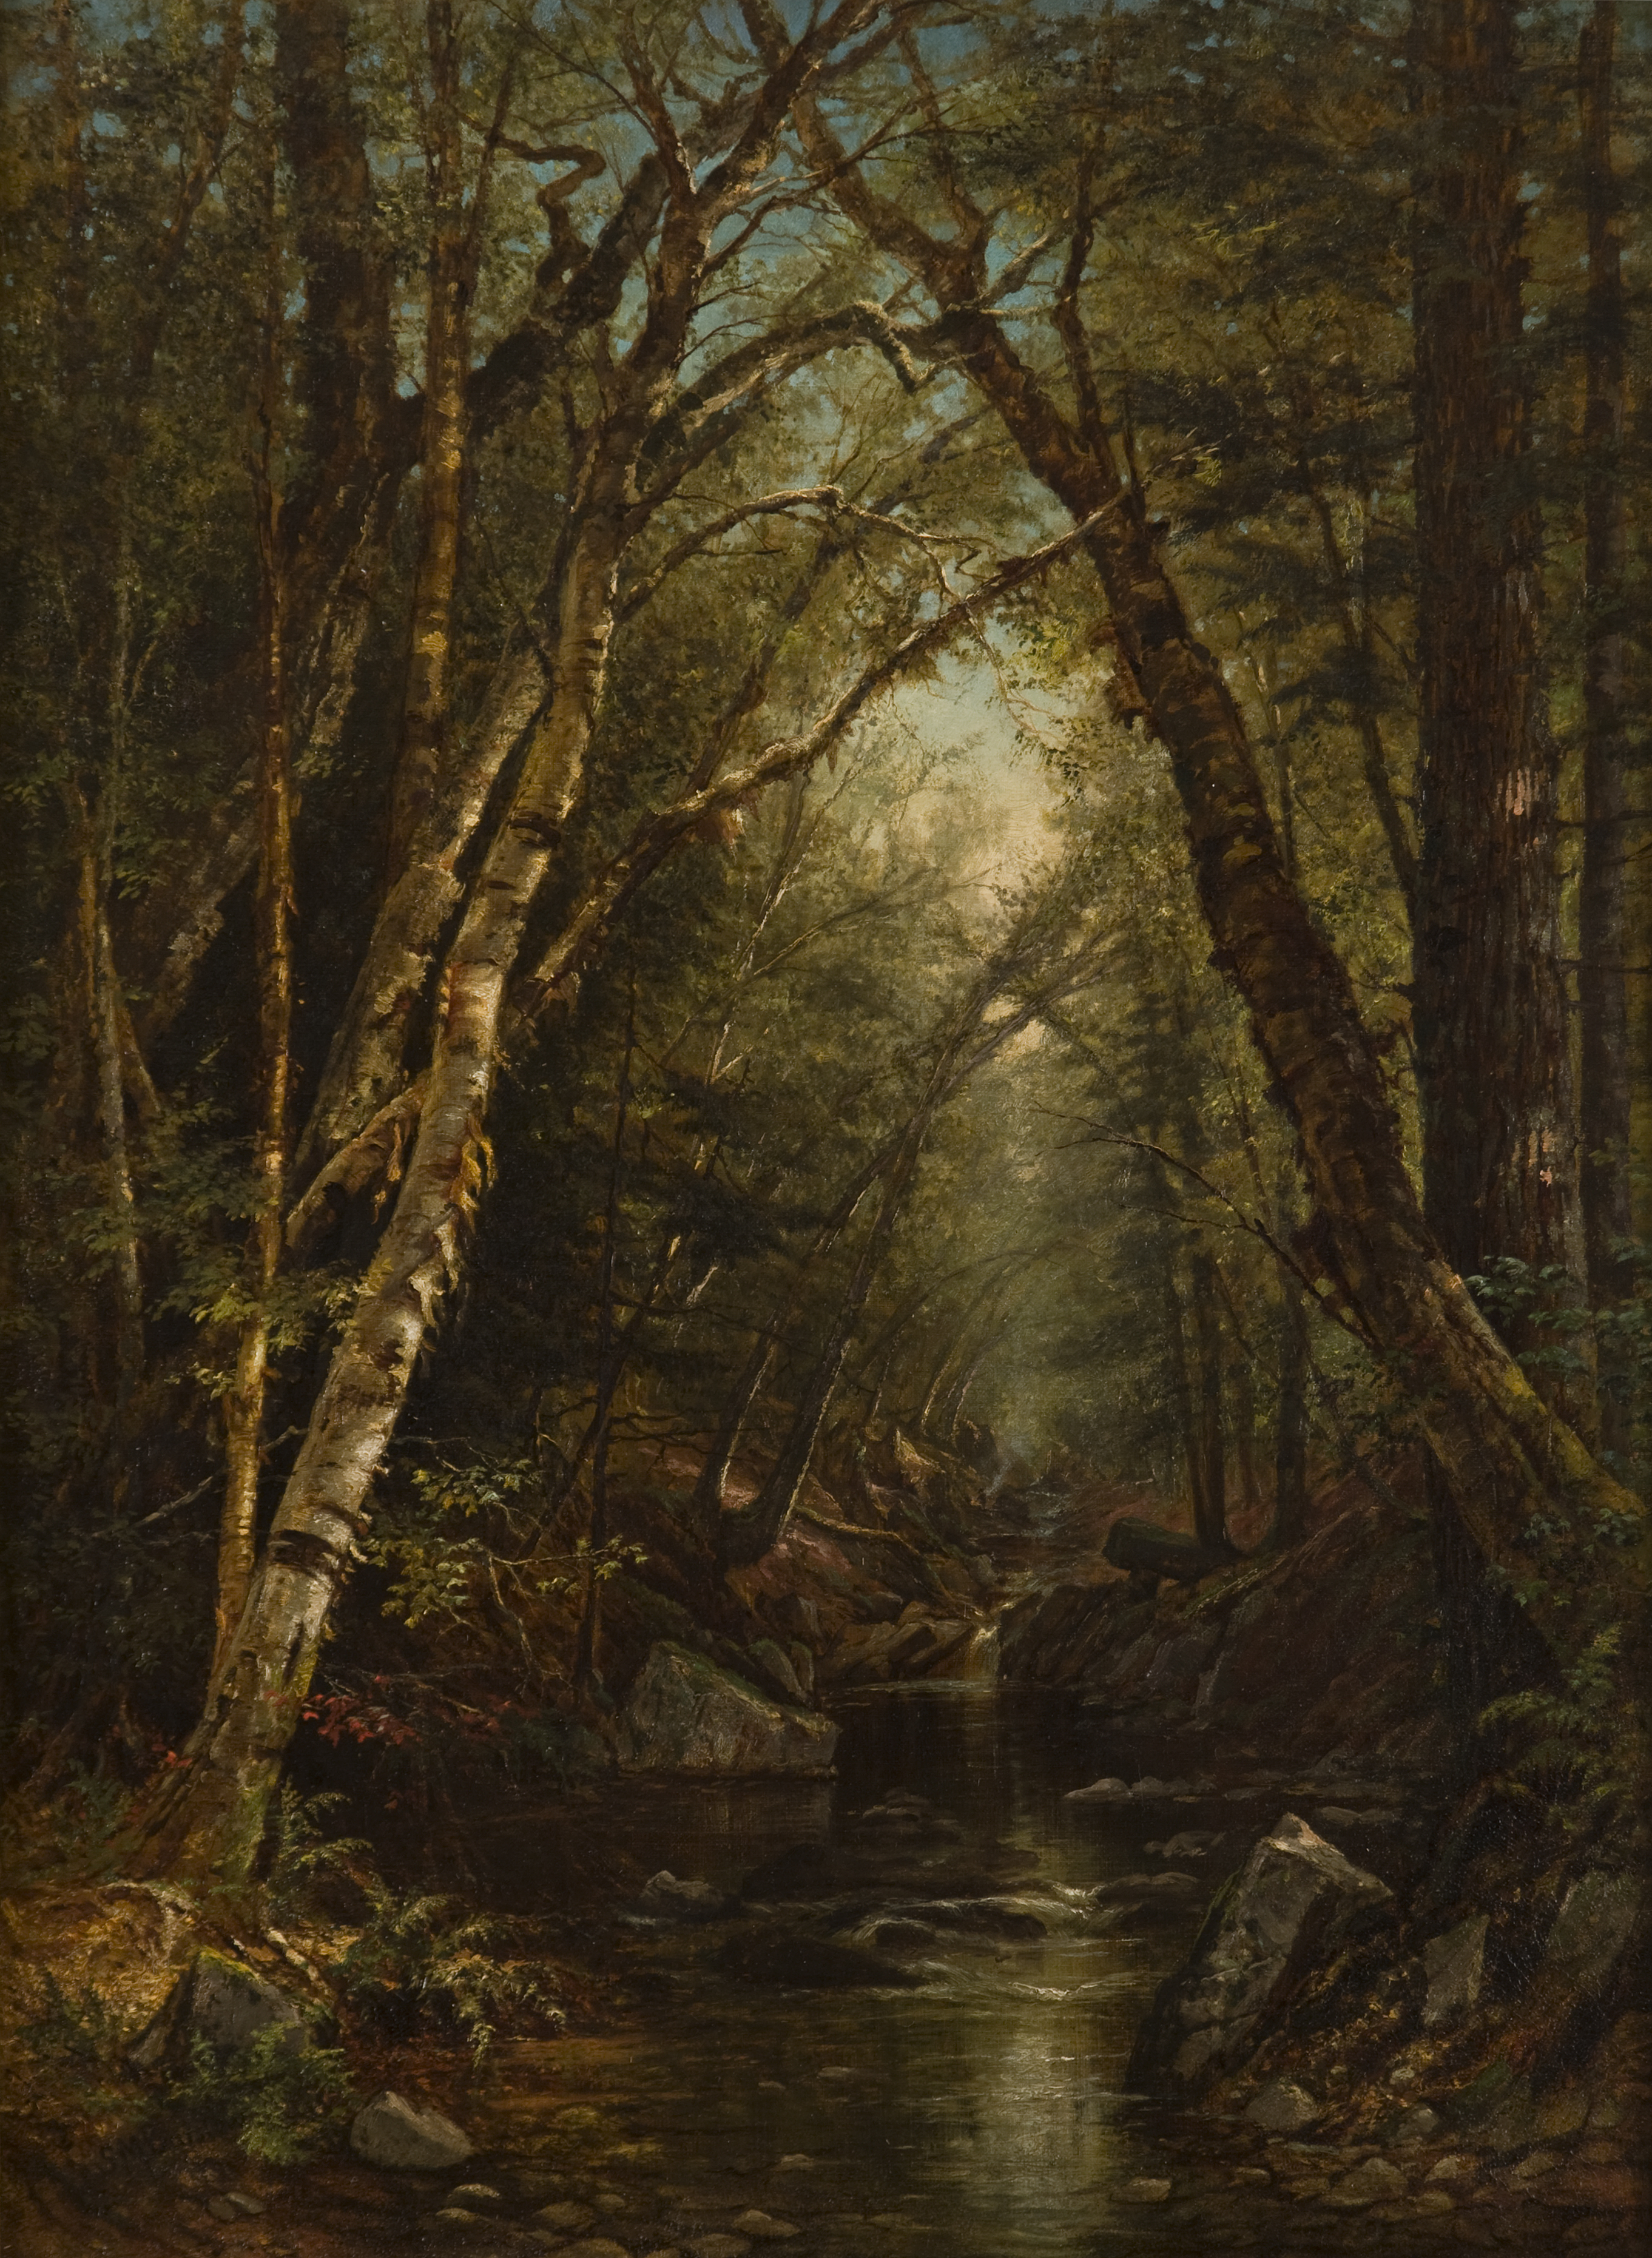 Susie M. Barstow, "Landscape," 1865, oil on canvas, 30 x 22 in., Scott Collection